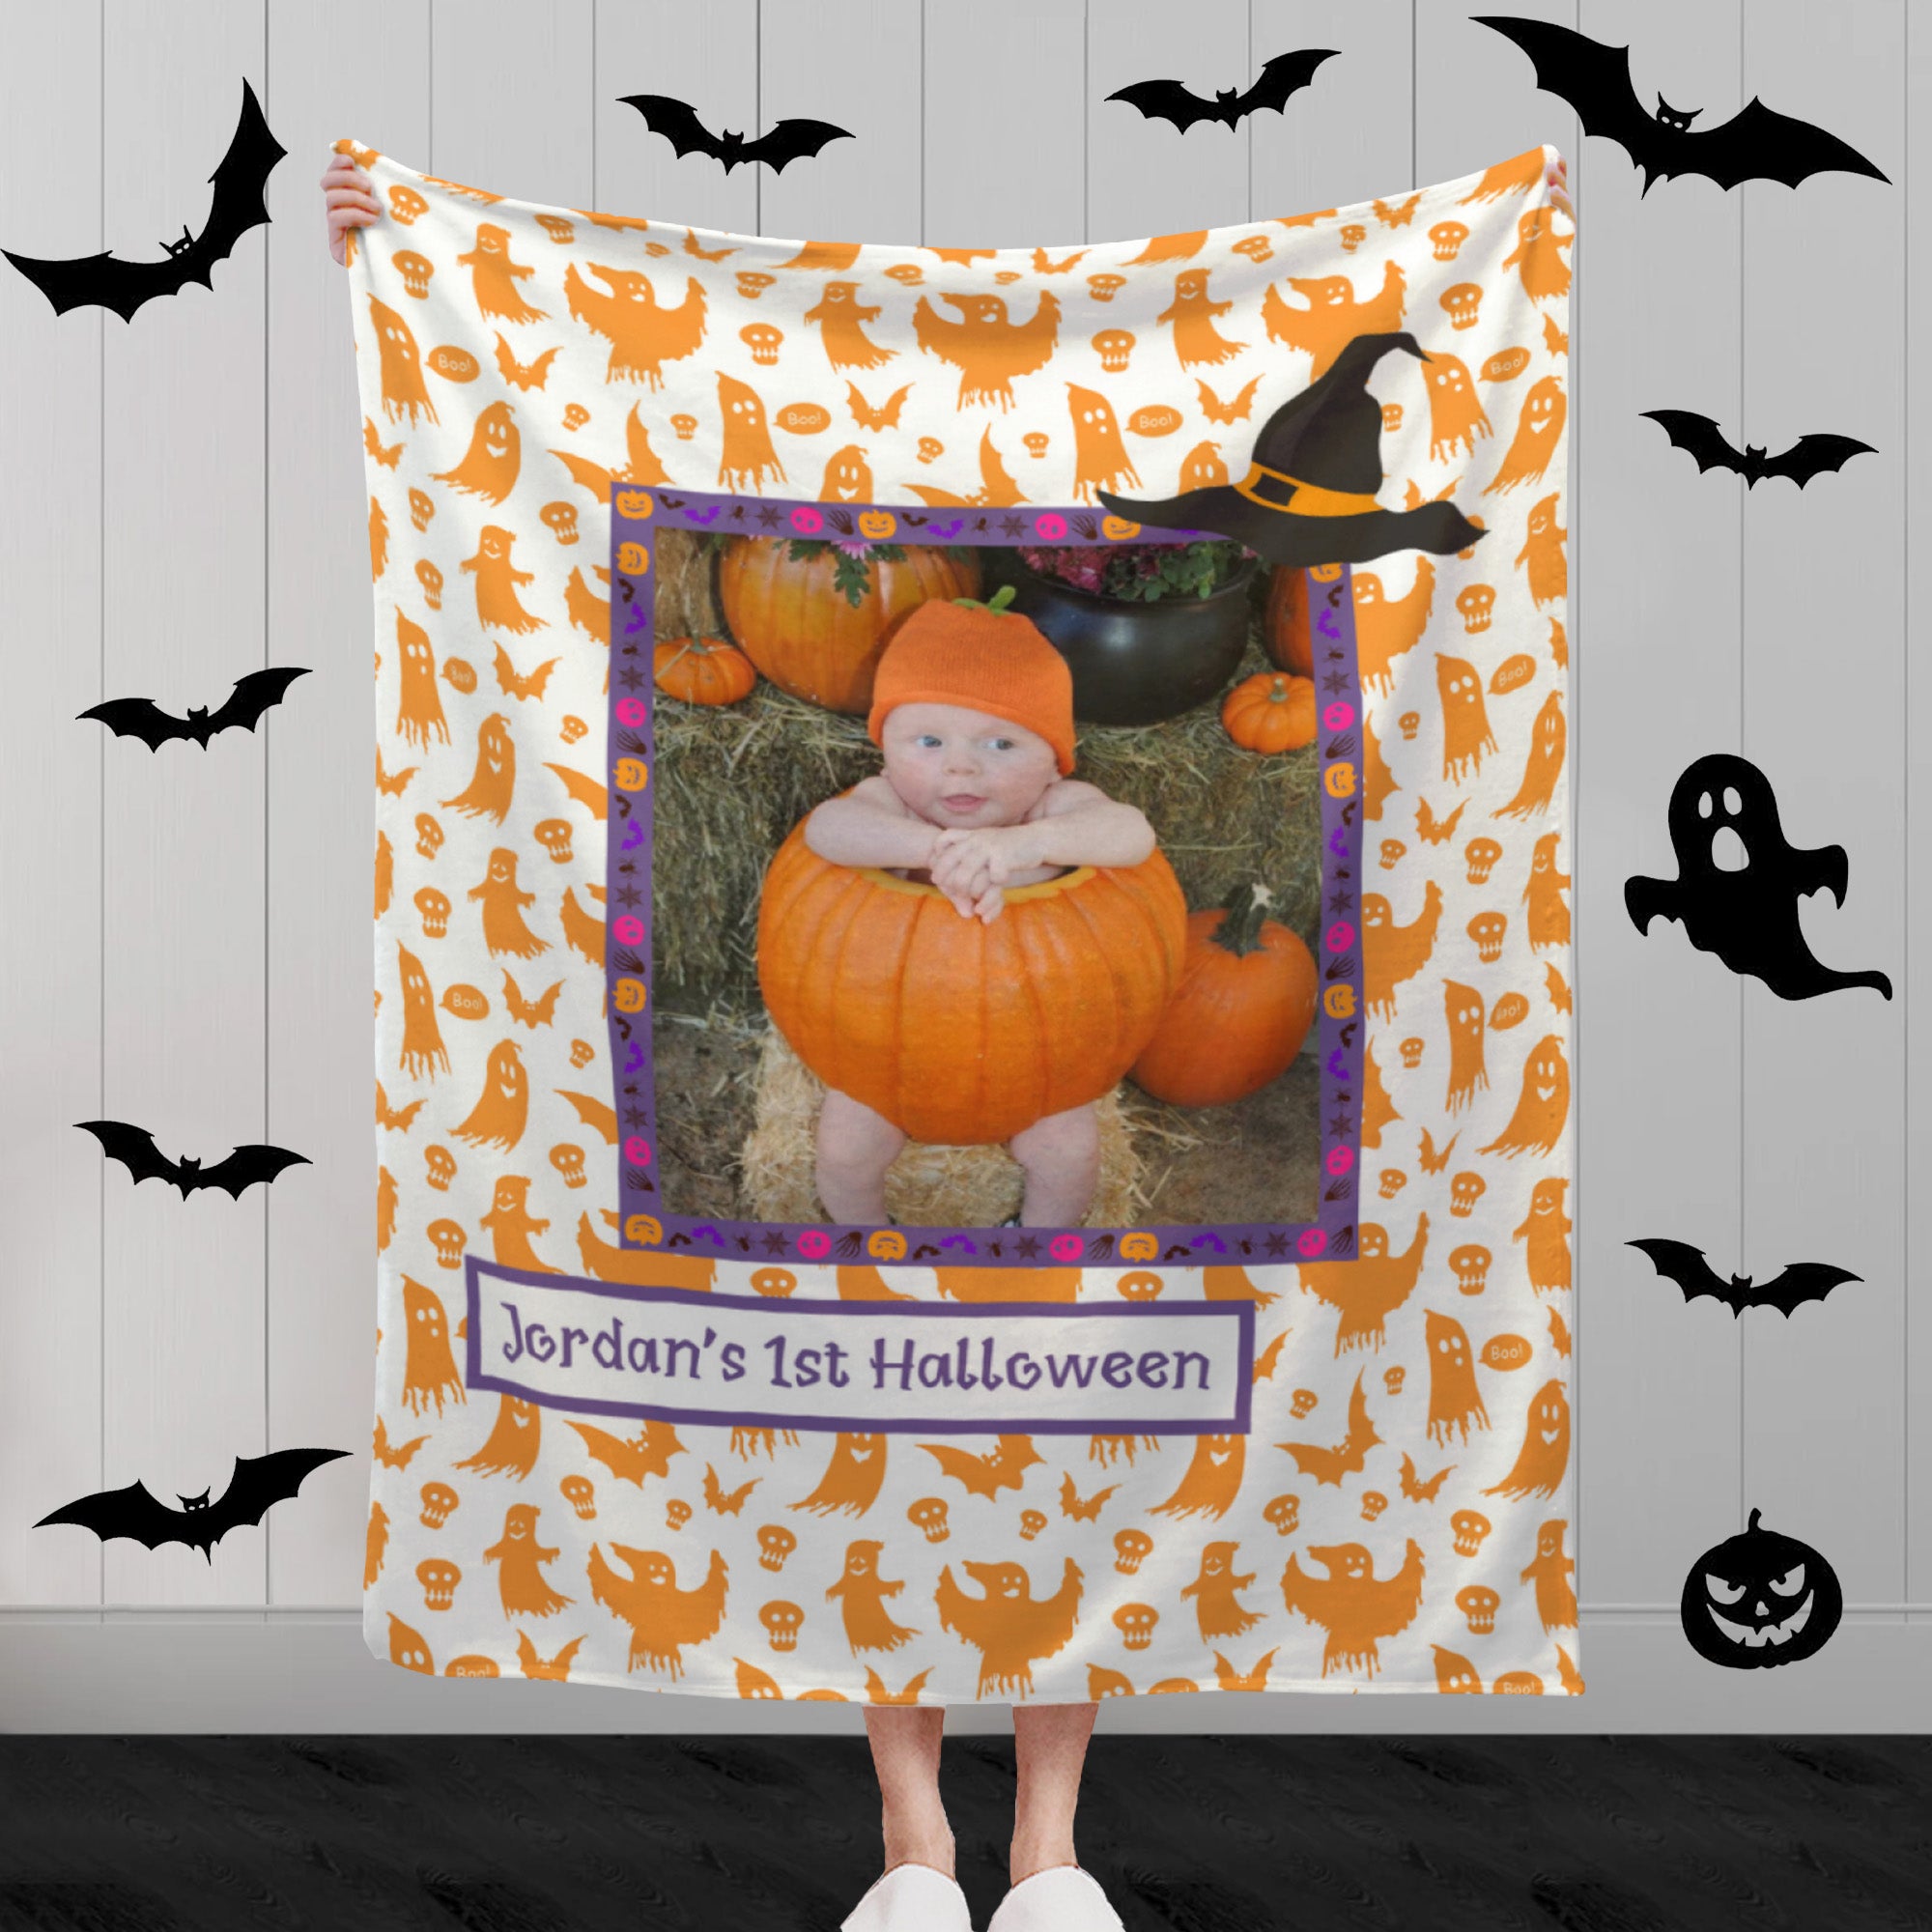 Baby's First Halloween Blanket with Photo and Name, Personalized Halloween Throw Blankets, Customized Blankets with Photos Gifts for Baby's First Halloween